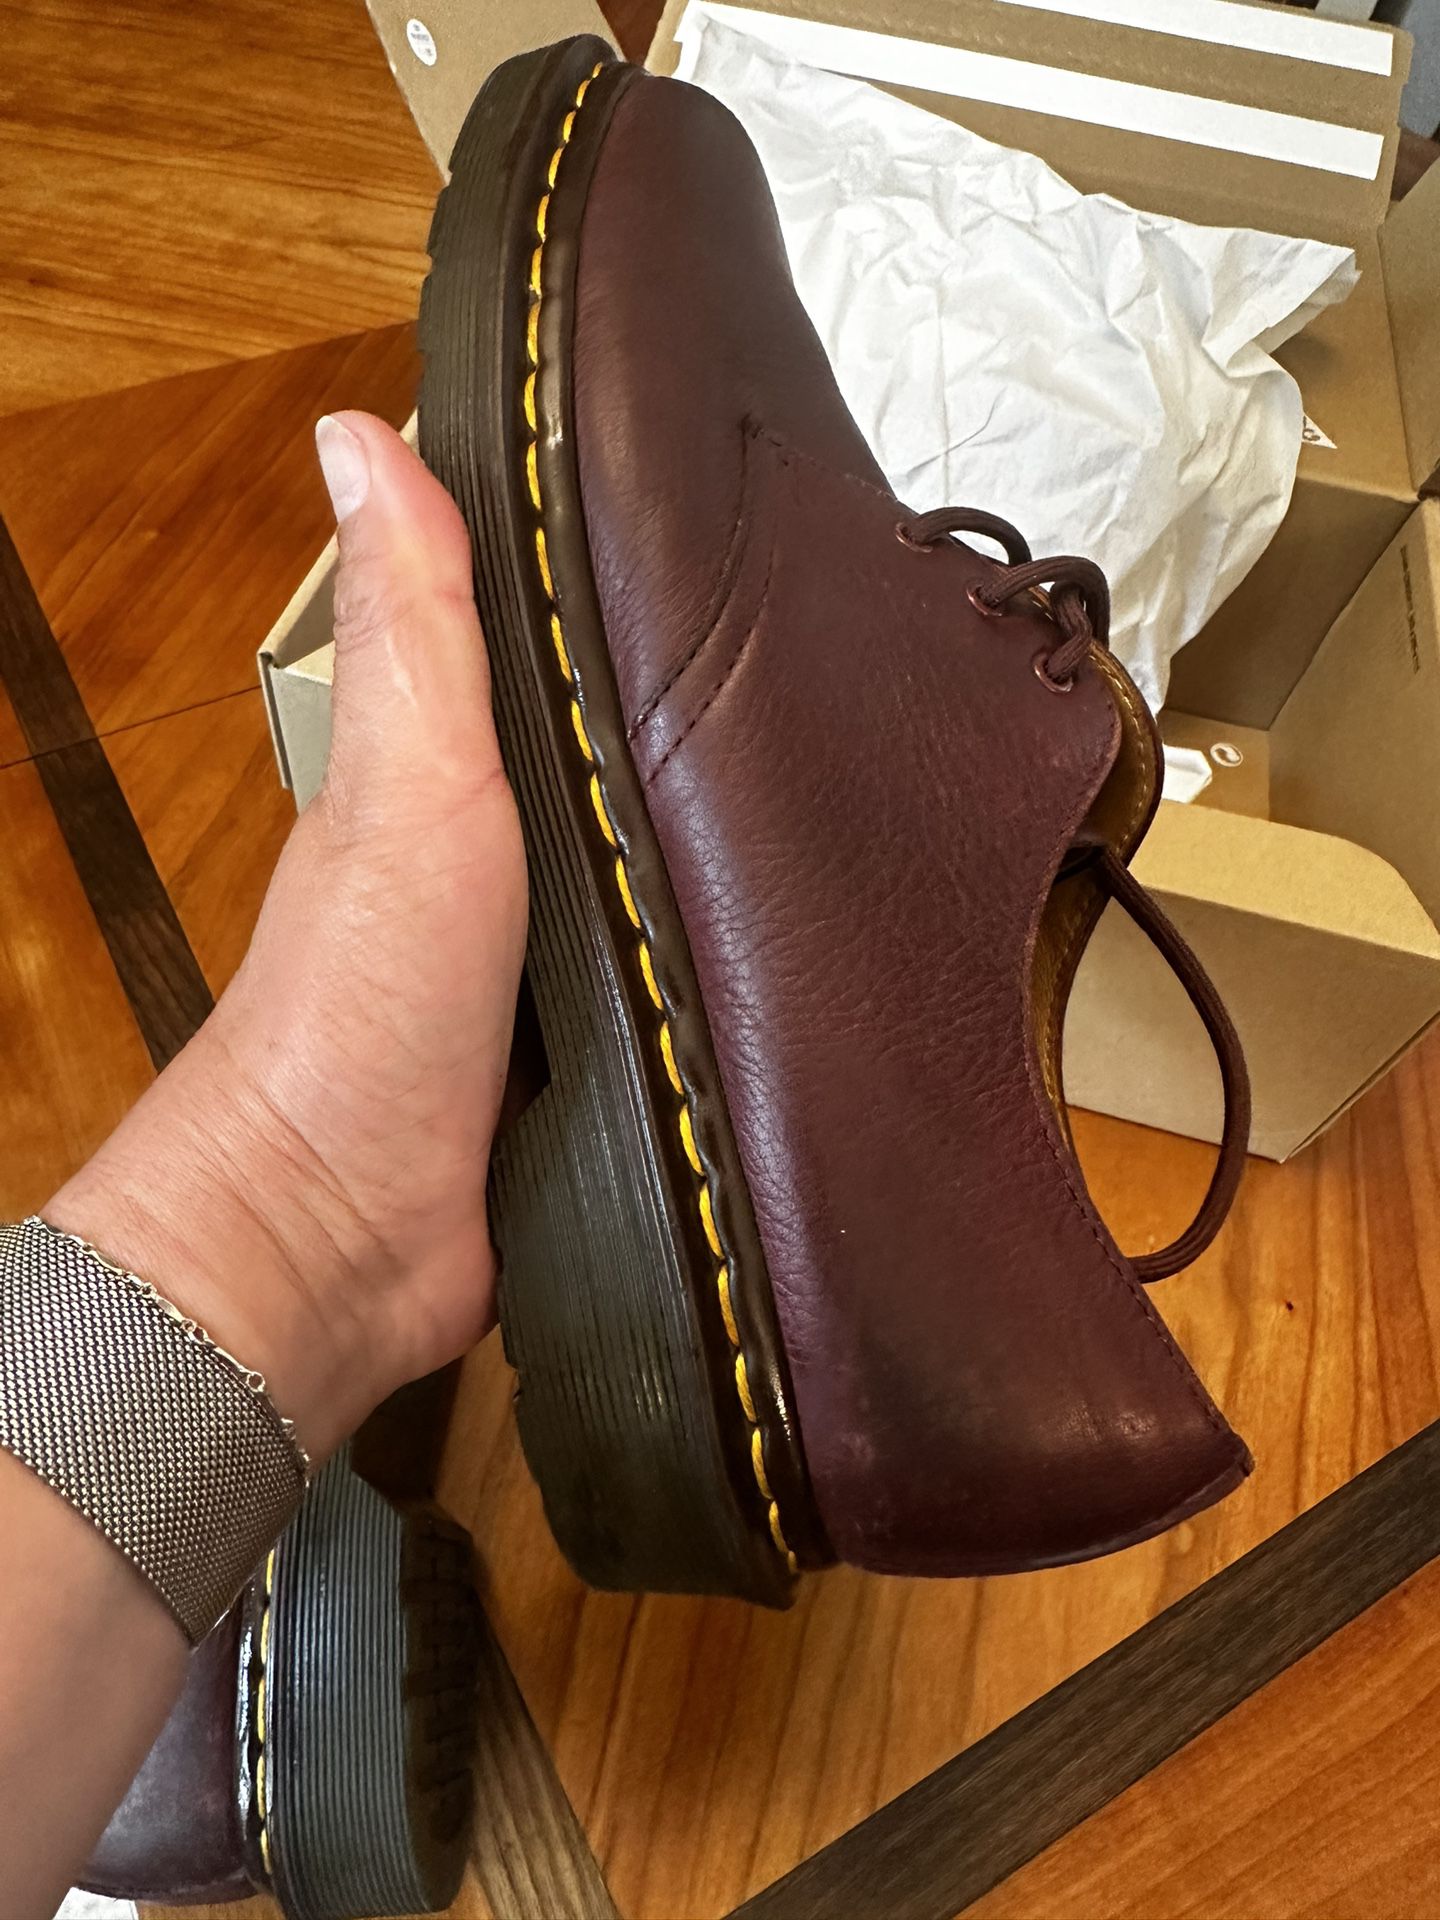 Leather Doc Martens $50